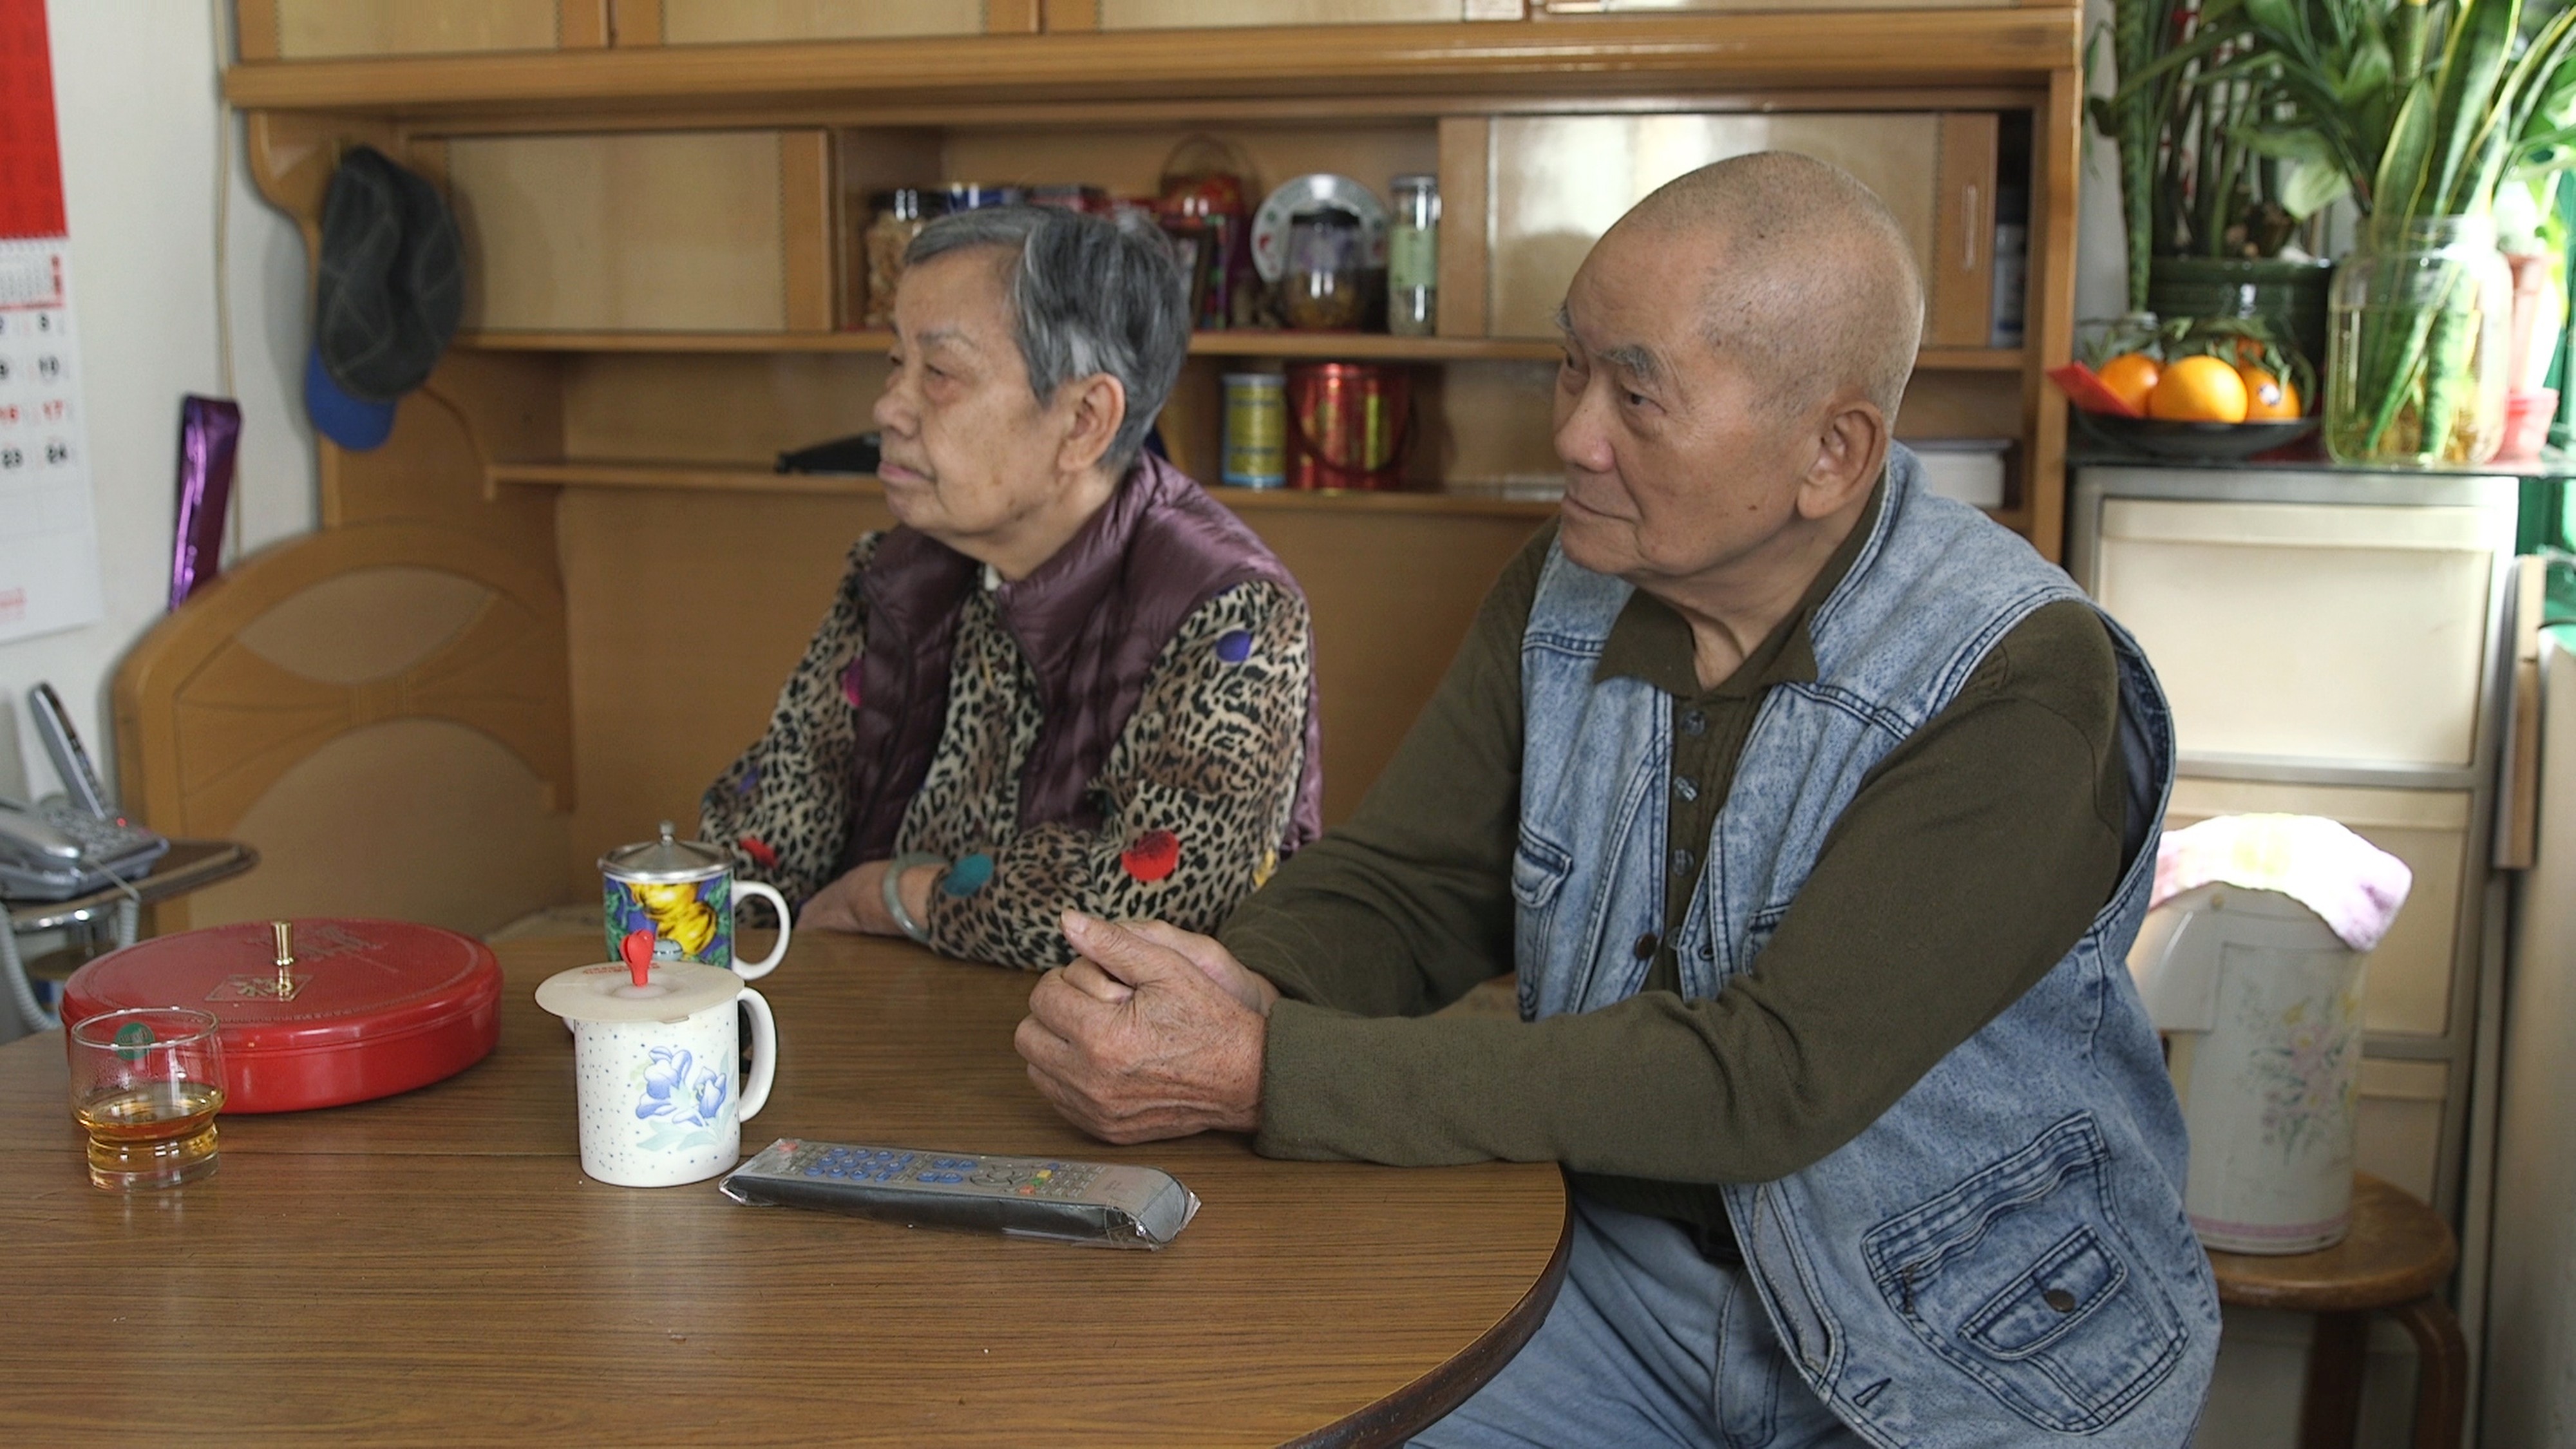 Mrs Mak, 84, and Mr Wat, 87, live a frugal life together in their flat bought in the 1970s. Photo: Handout